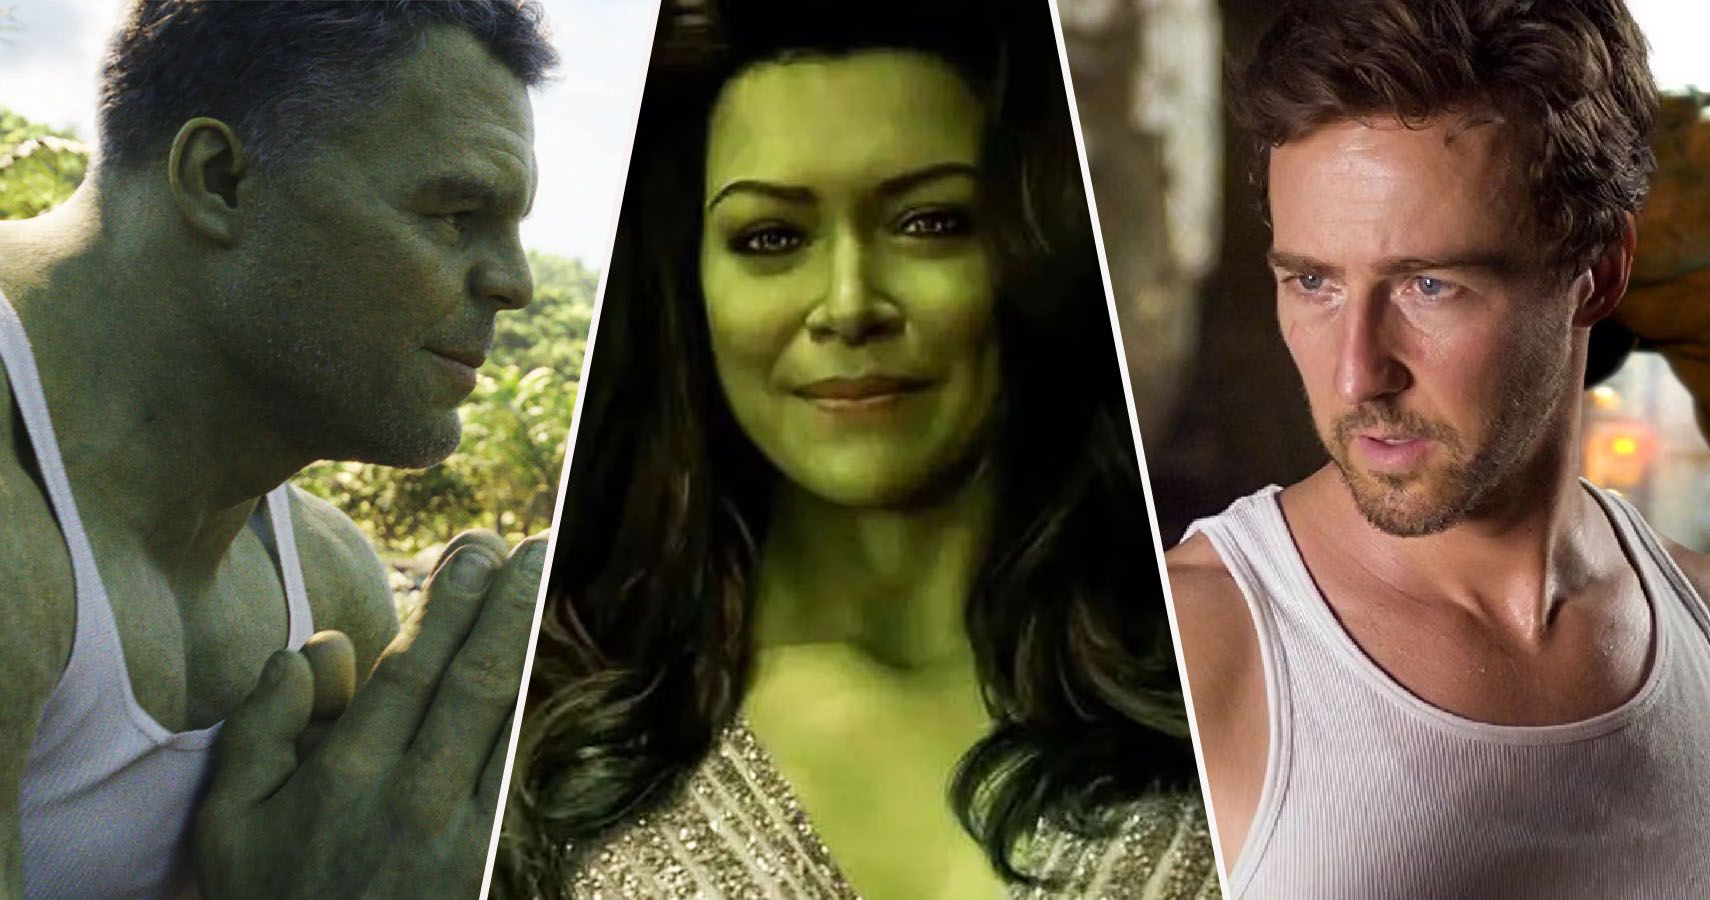 She-Hulk Just Joined Rotten Tomatoes 'Best Shows of 2022' List